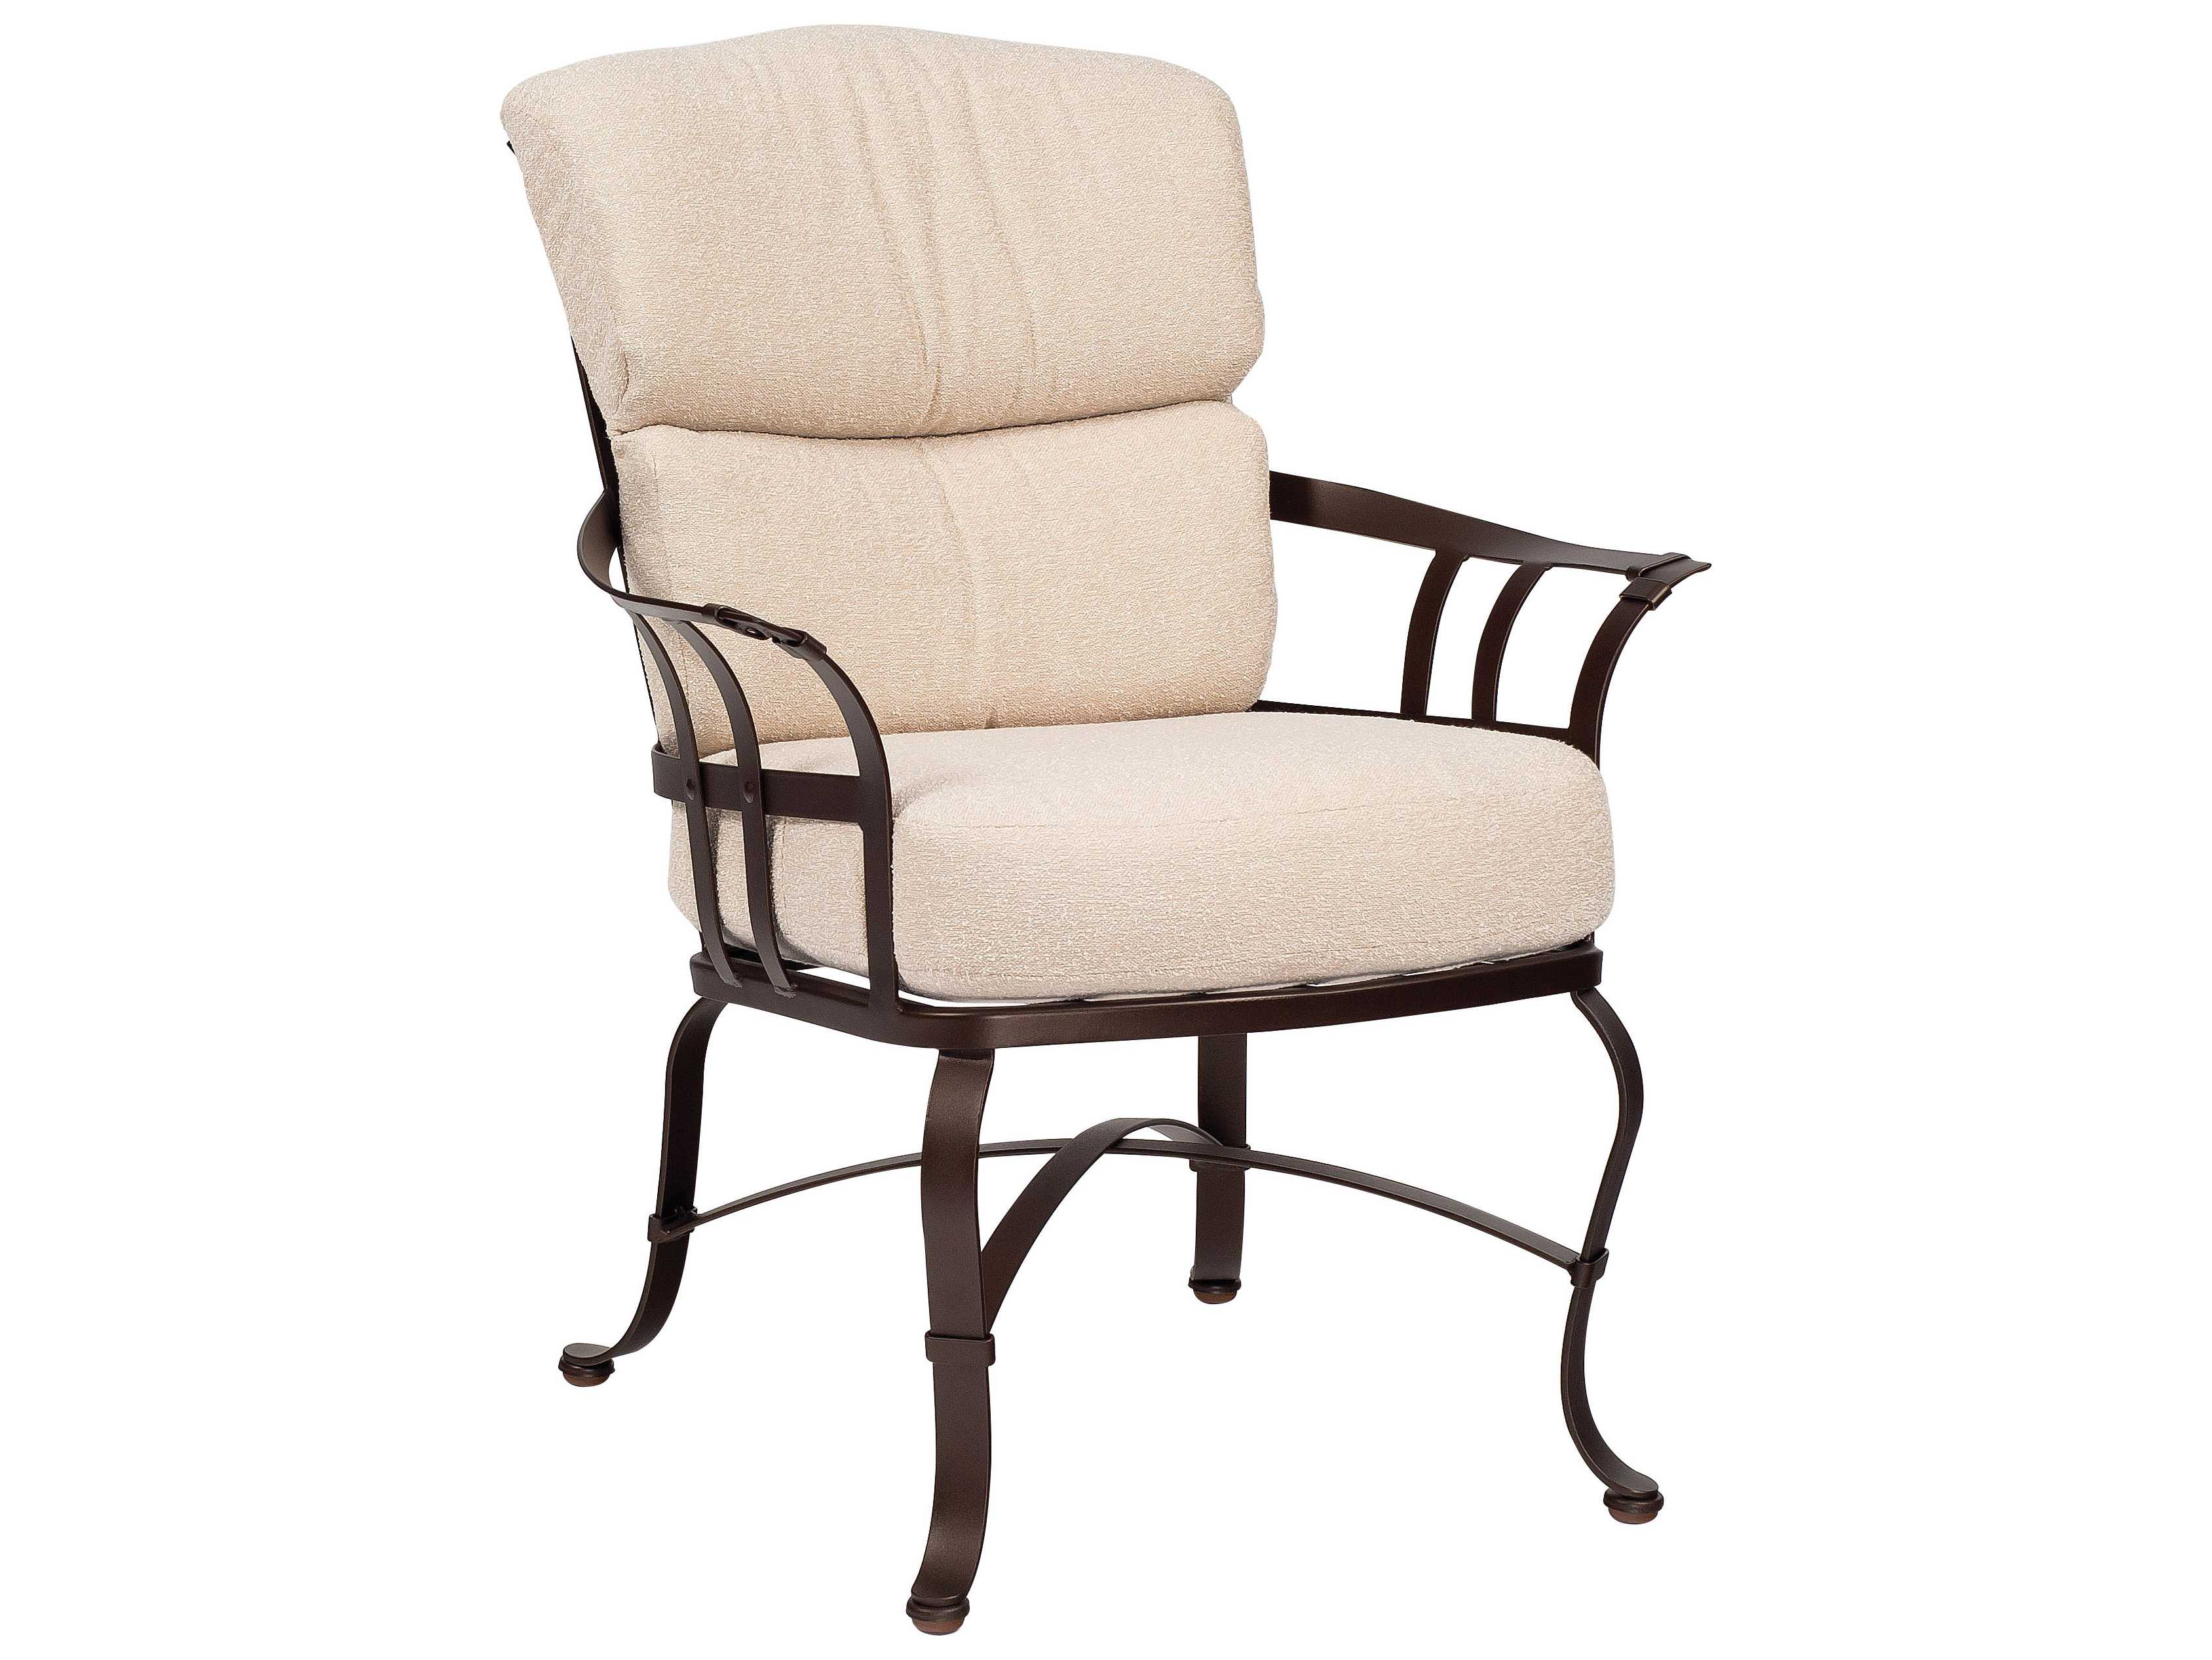 Overstock Wrought Iron Dining Room Chairs